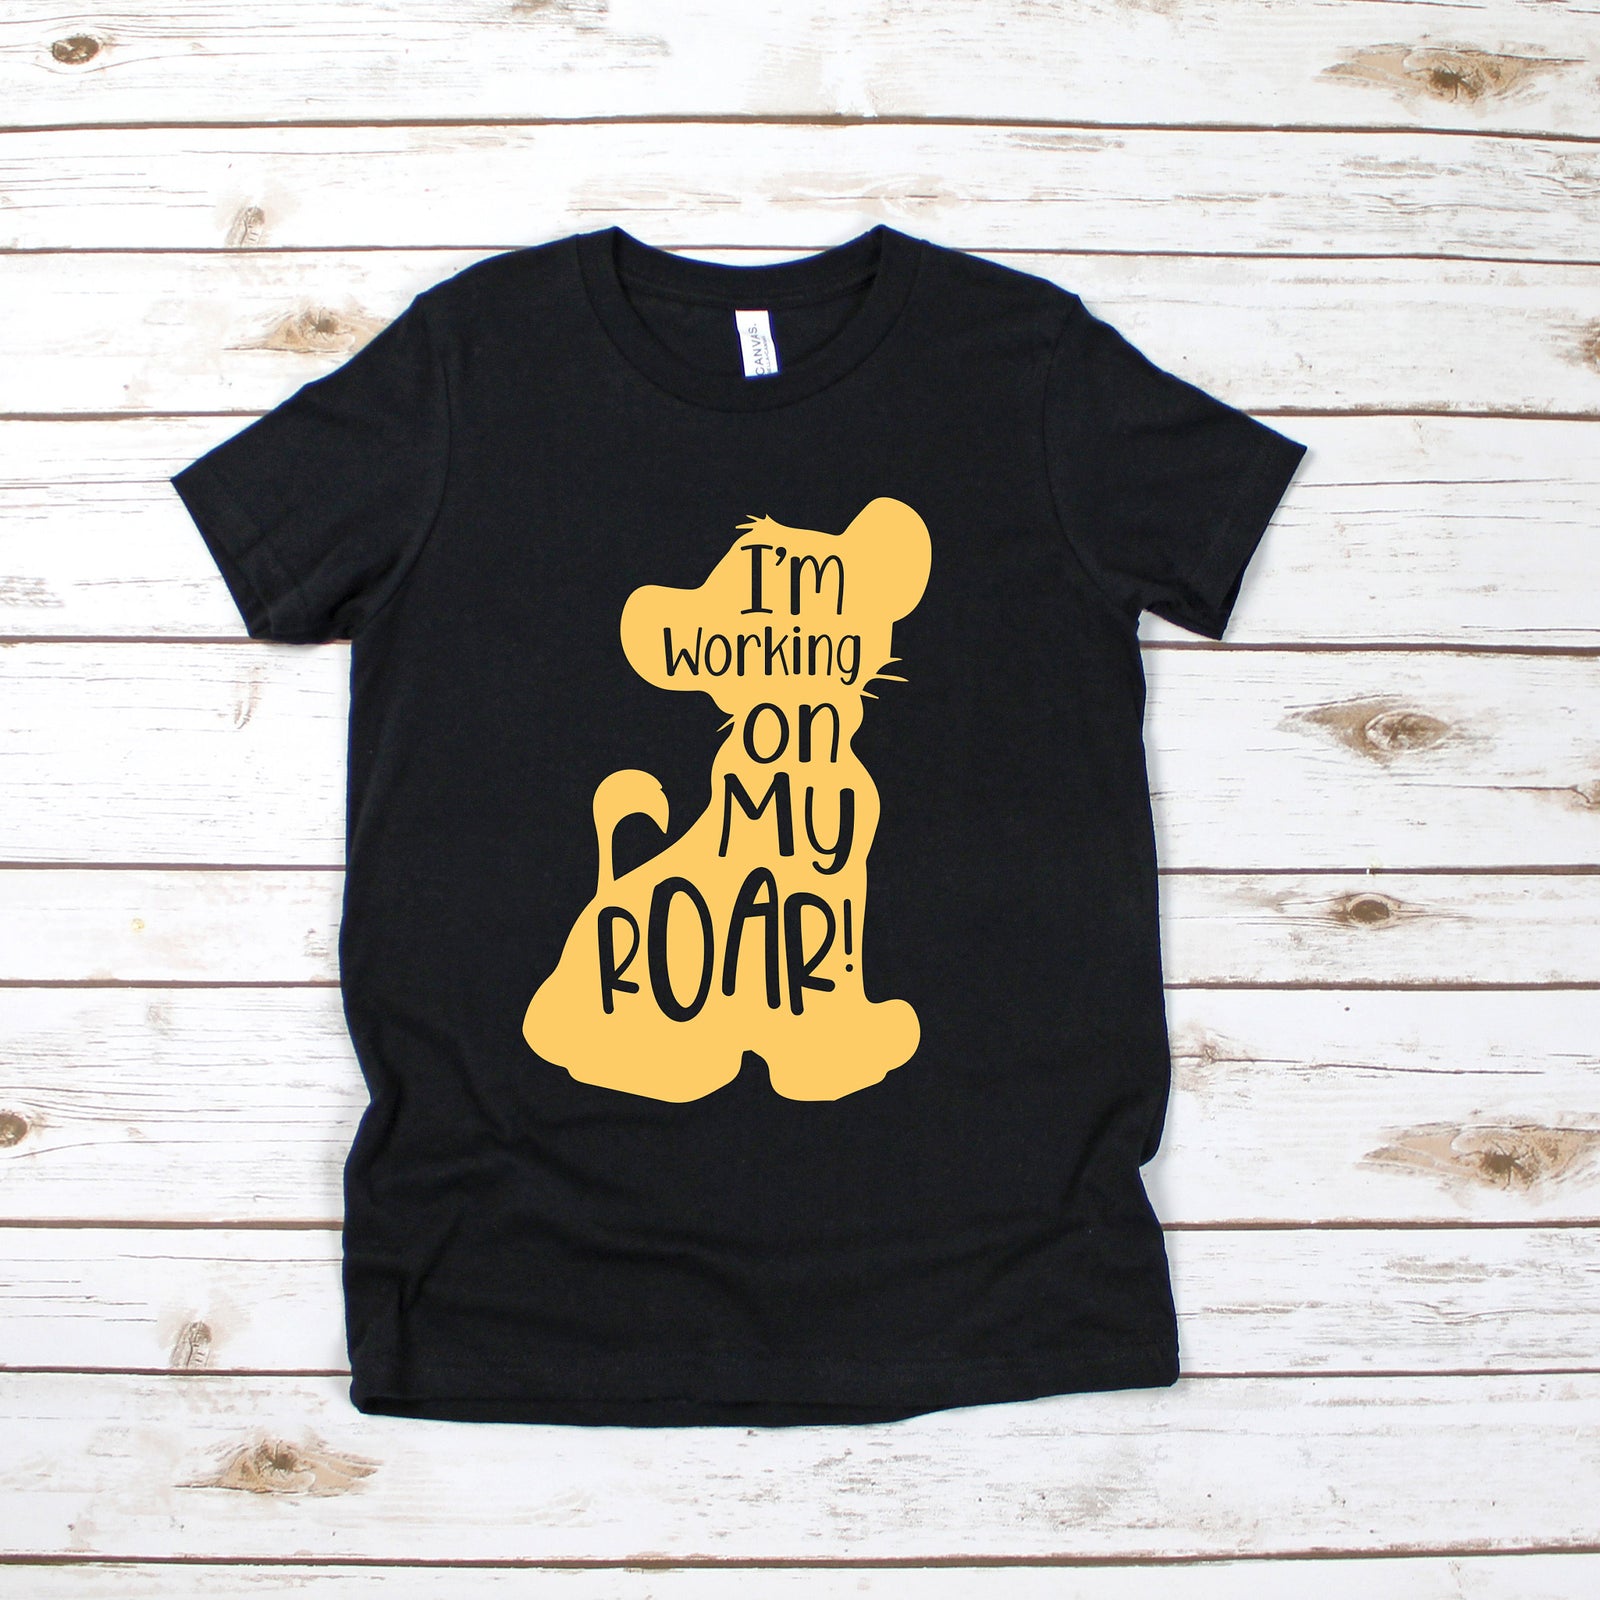 I'm Working on My Roar - Infant Toddler or Youth T Shirt - Disney Kids Lion King Simba Graphic T Shirt